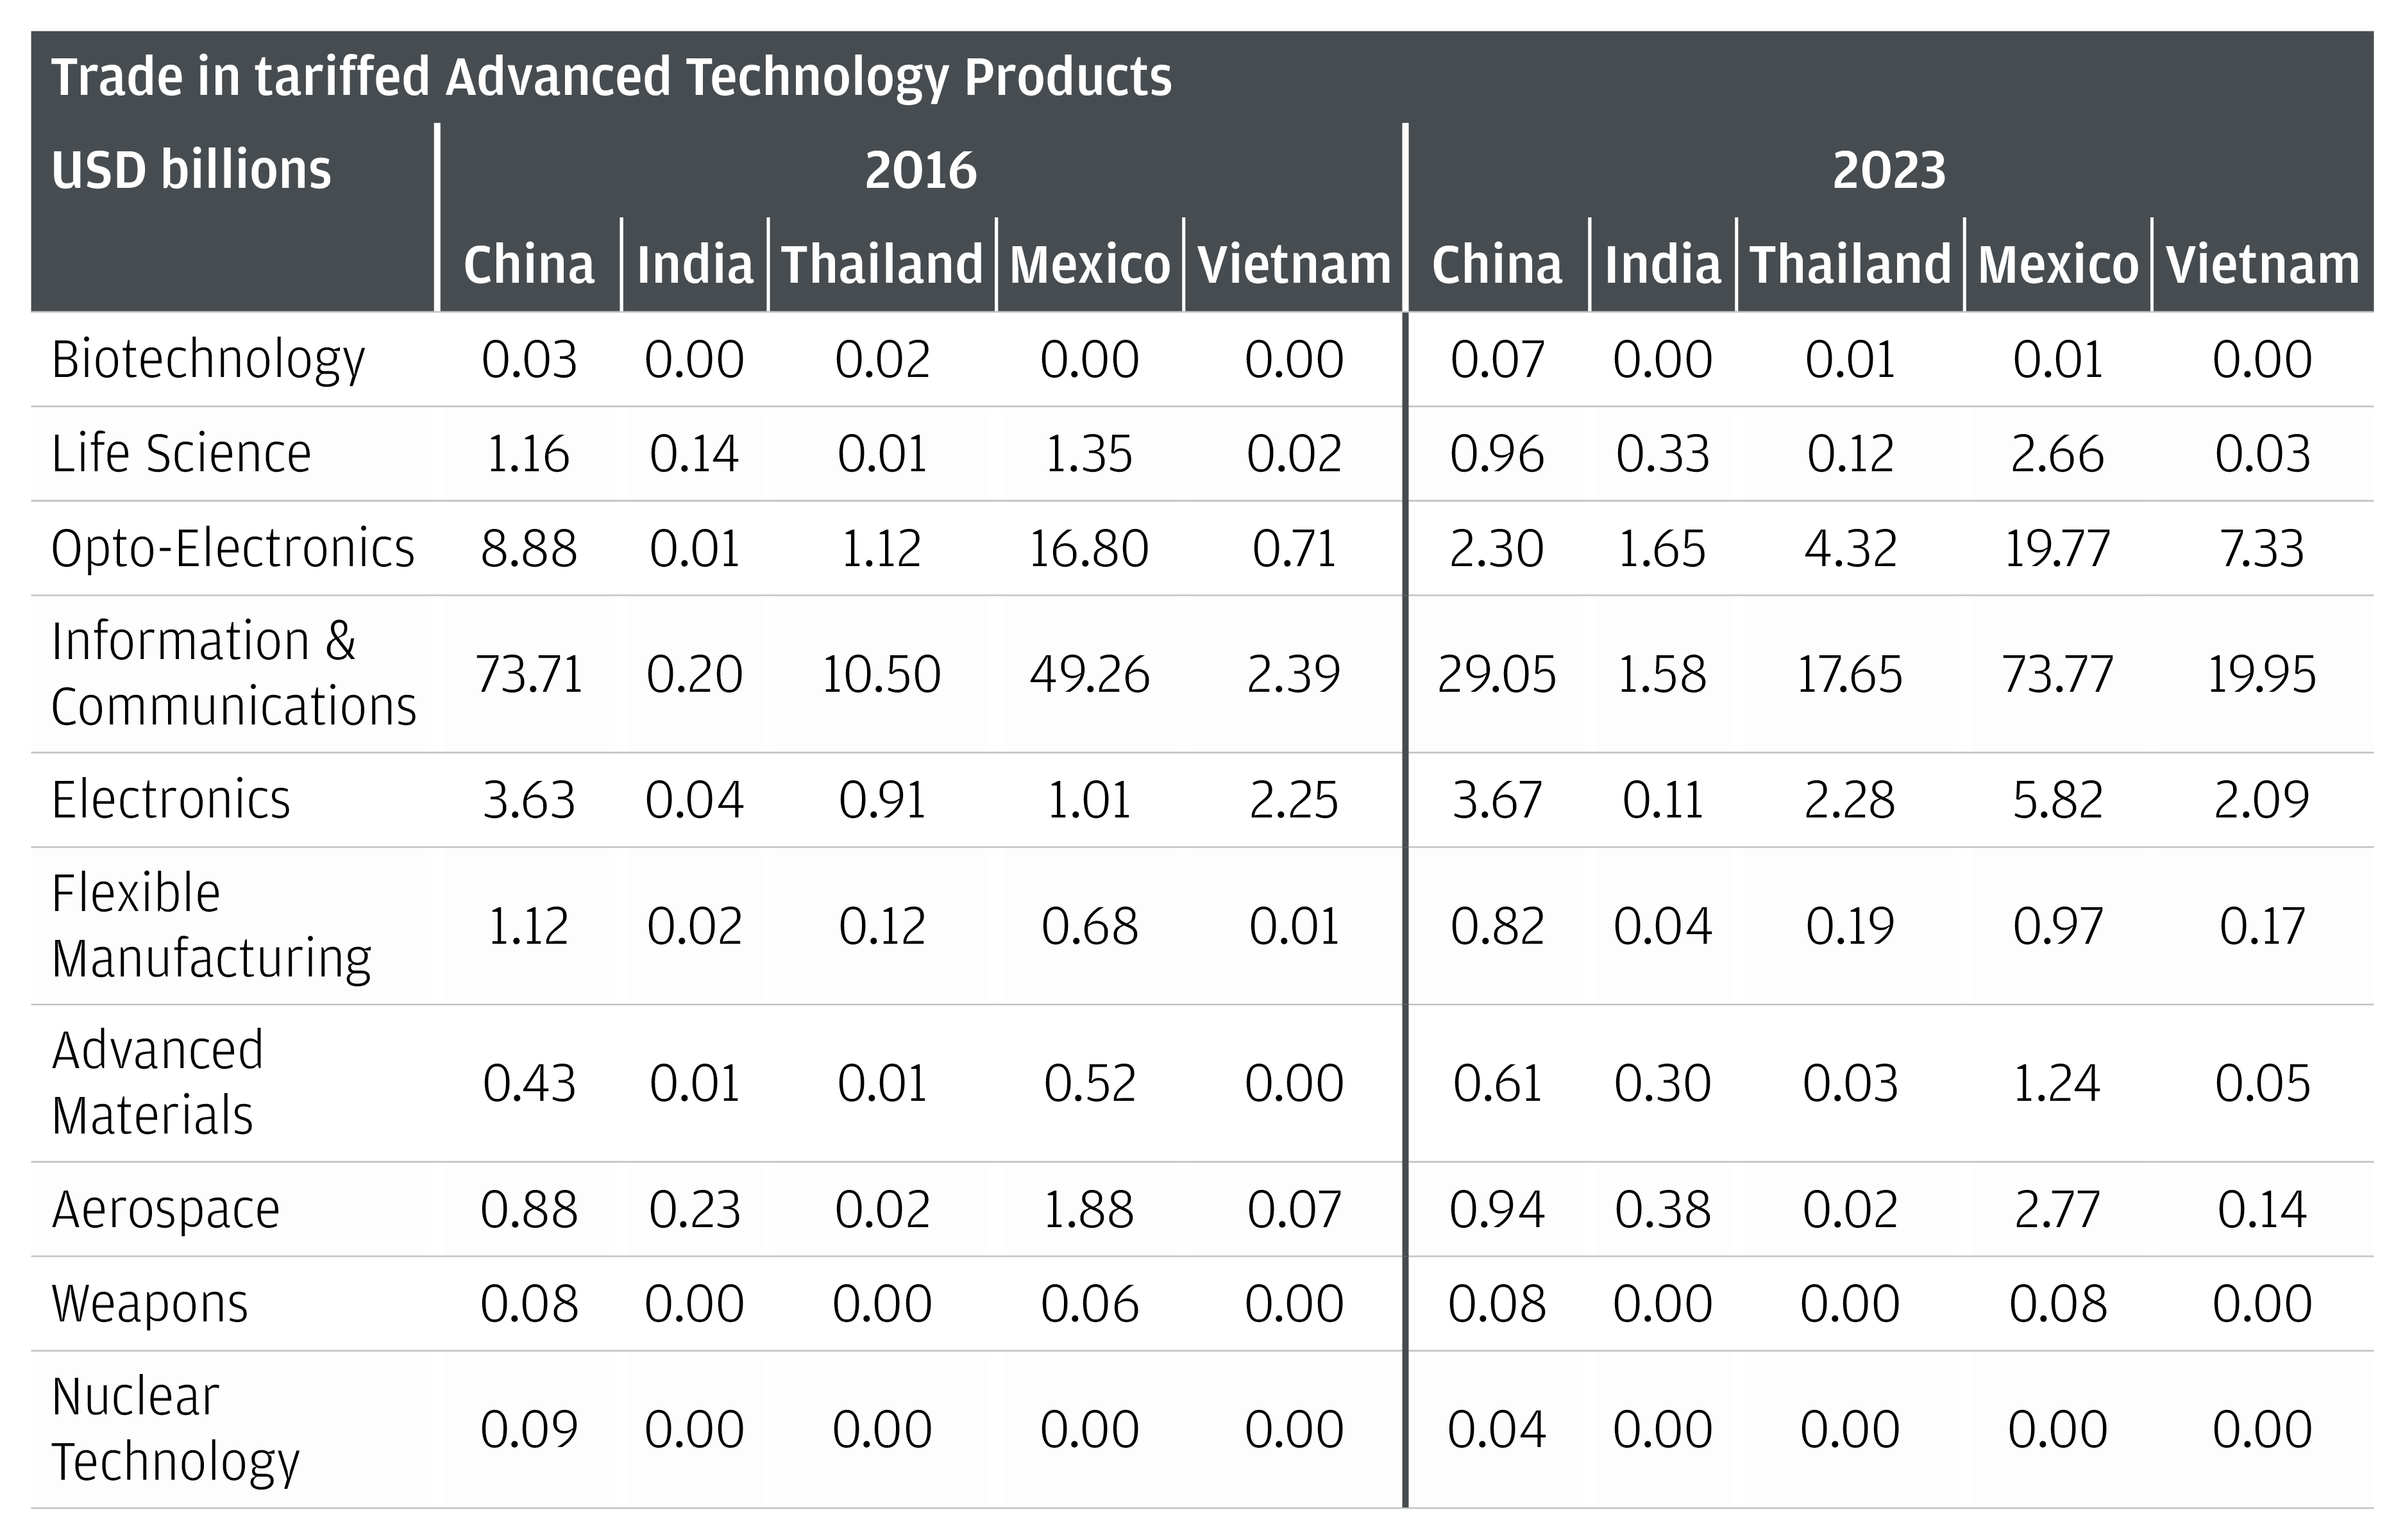 The chart describes the trade of U.S. imports of Advanced Technology Products tariffed against China by country (China, India, Thailand, Mexico, Vietnam) in 2016 and 2023.